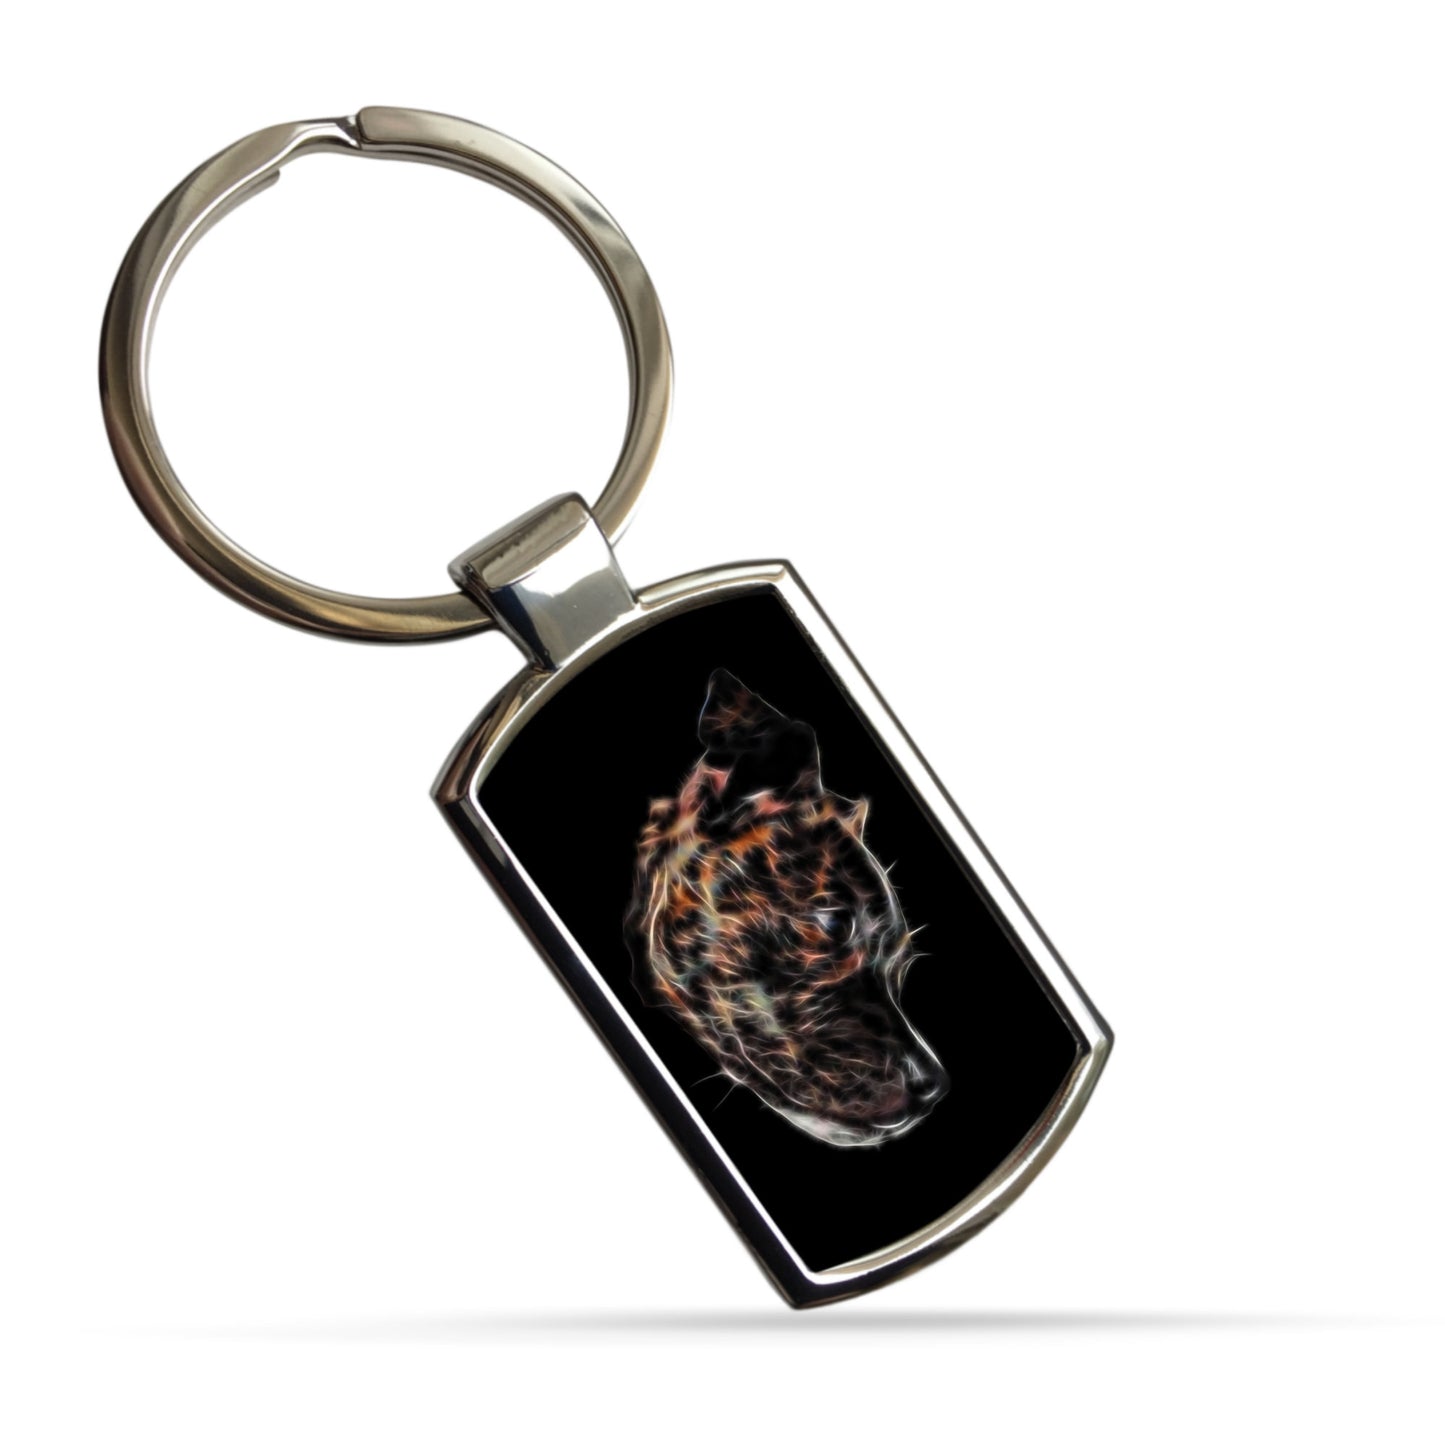 Brindle Staffordshire Bull Terrier Keychain with Stunning Fractal Art Design. A Perfect Gift for Dog Lover.